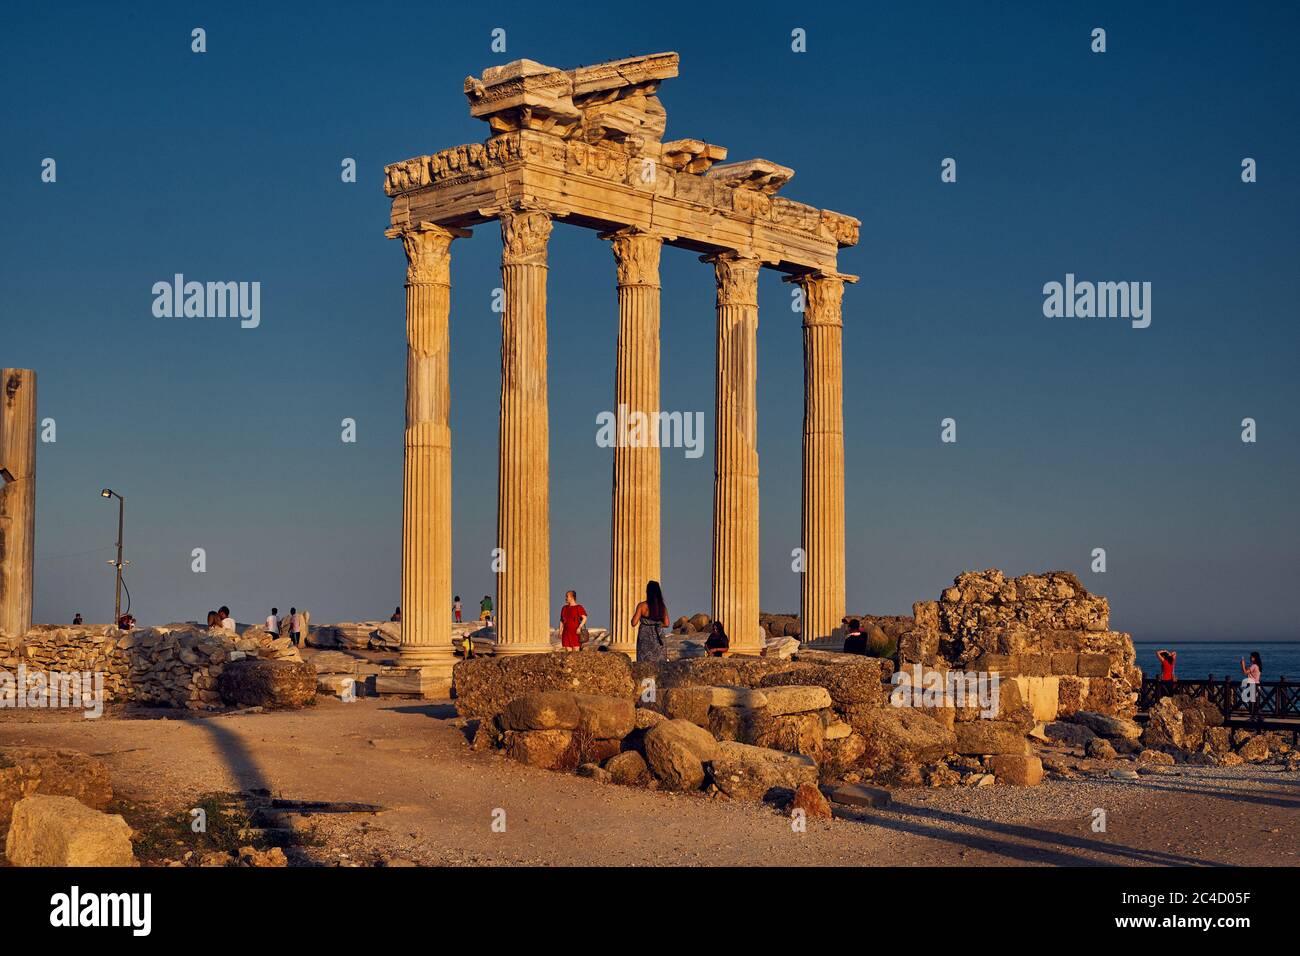 Side, Turkey- July 3, 2017: The Temple of Apollo - The ruins of an ancient Roman temple on the shores of the Mediterranean Sea Stock Photo